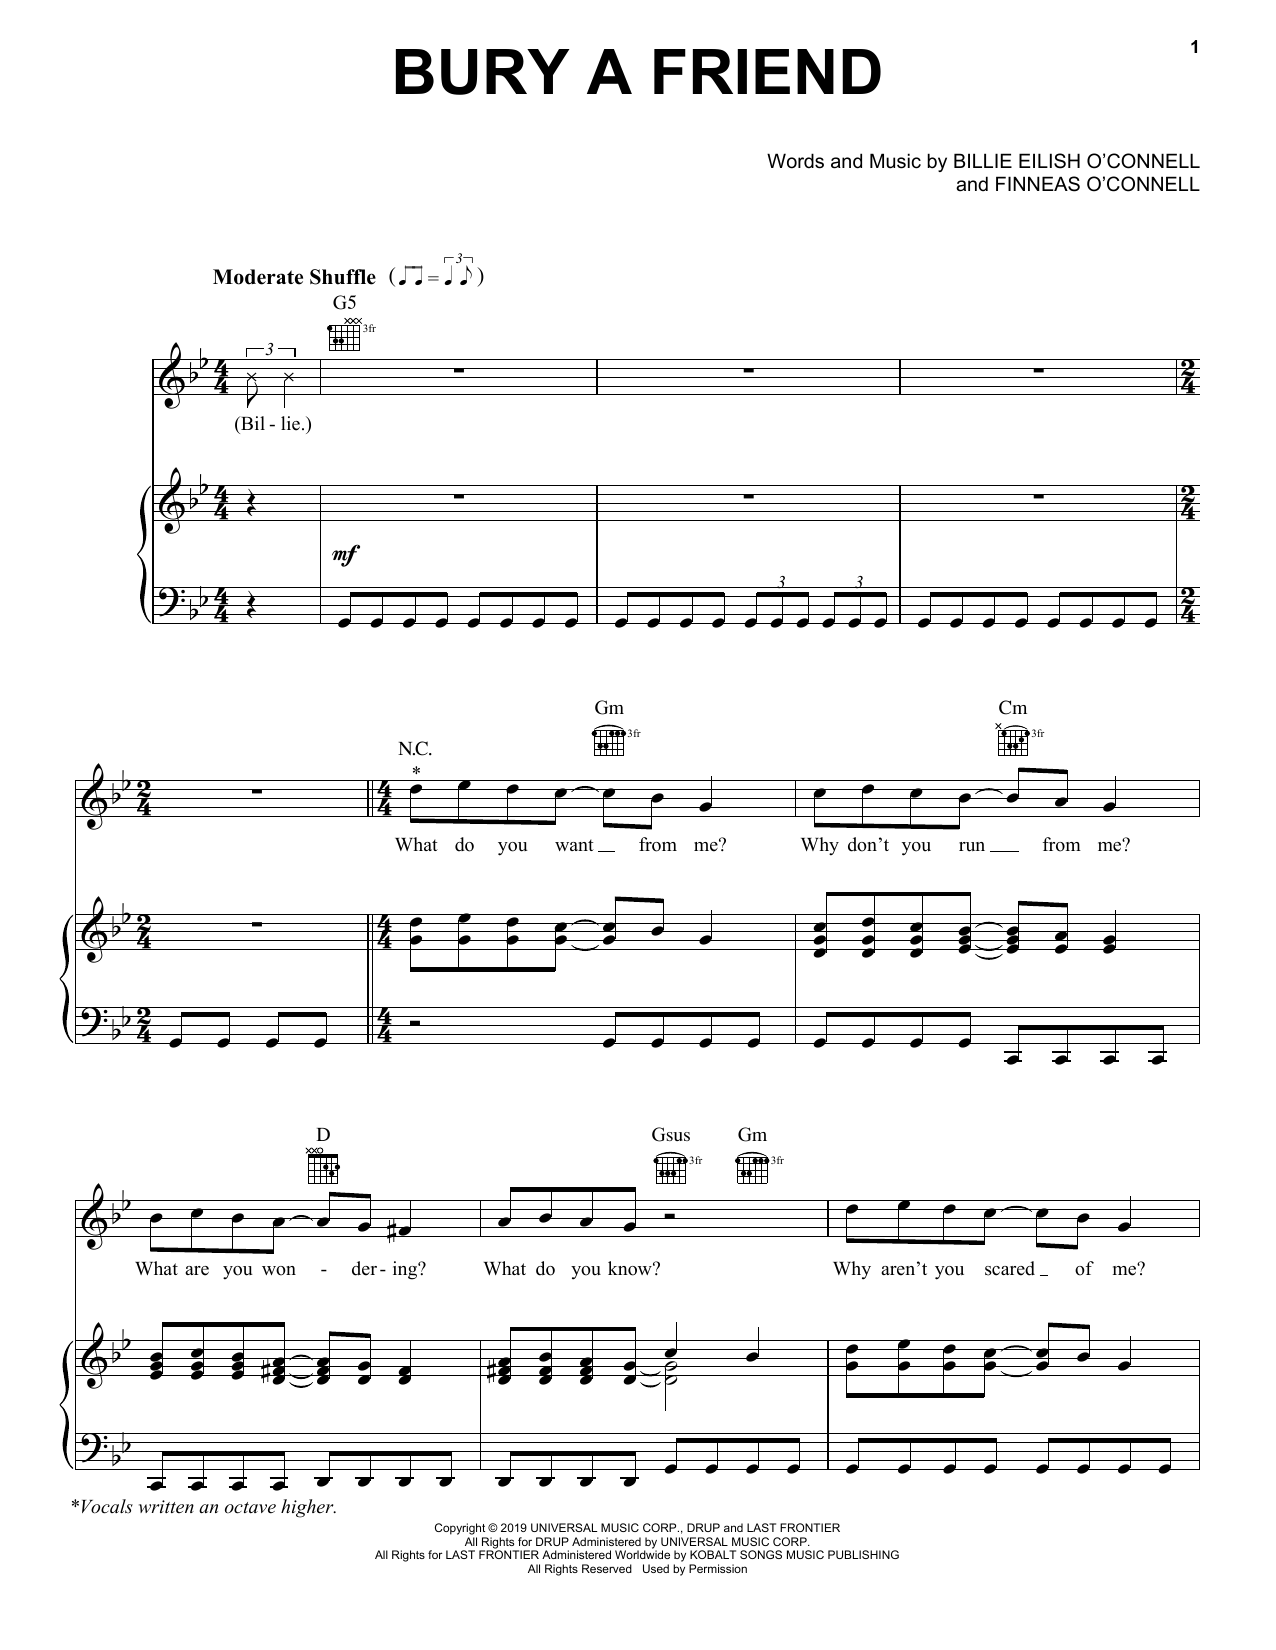 Eilish "bury a friend" Music PDF Notes, Chords | Pop Score Piano, Vocal & Guitar (Right-Hand Melody) Download Printable. SKU: 414483